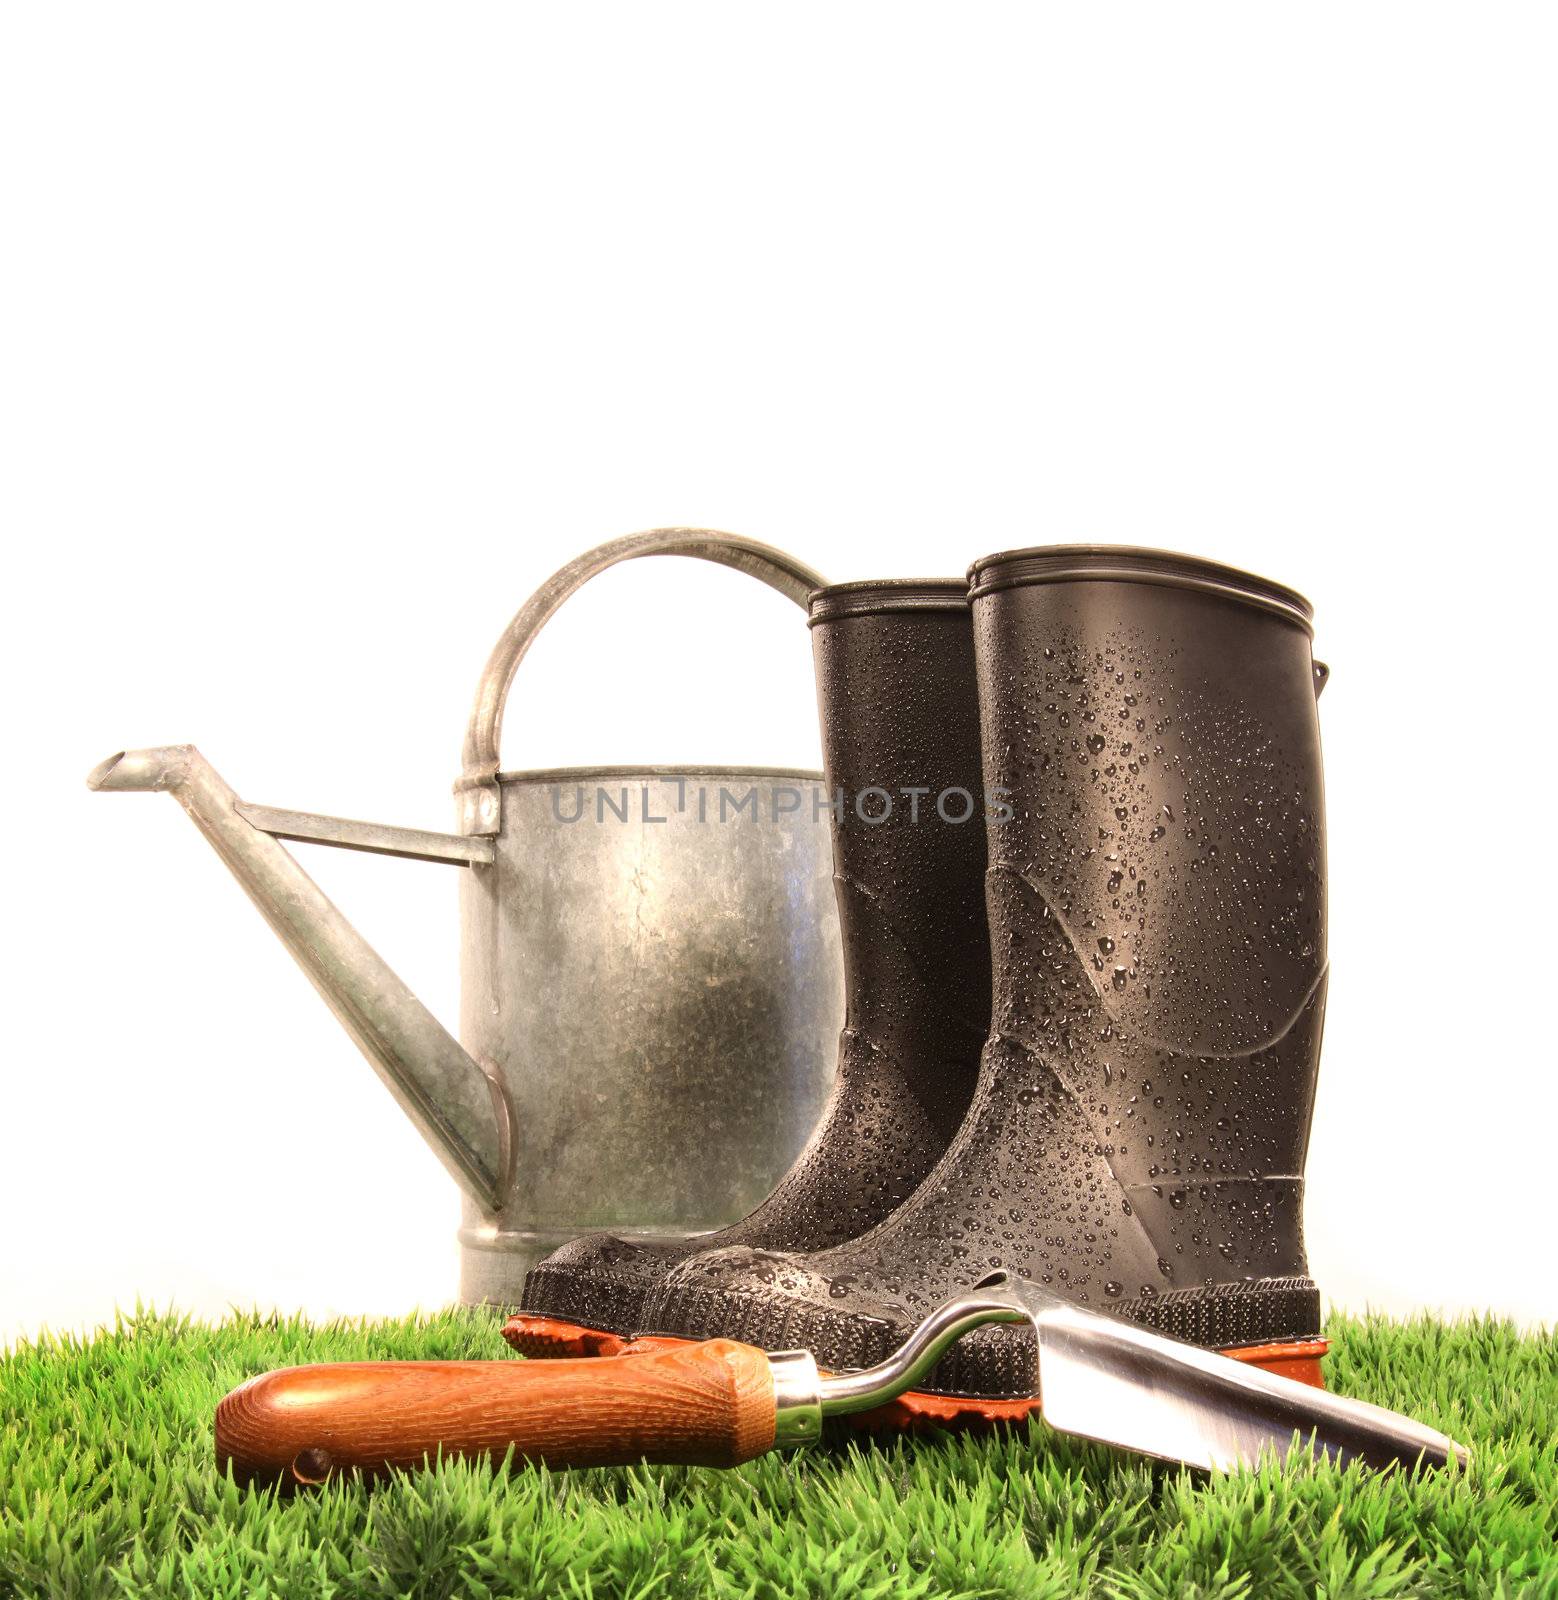 Garden boots with tool and watering can on grass